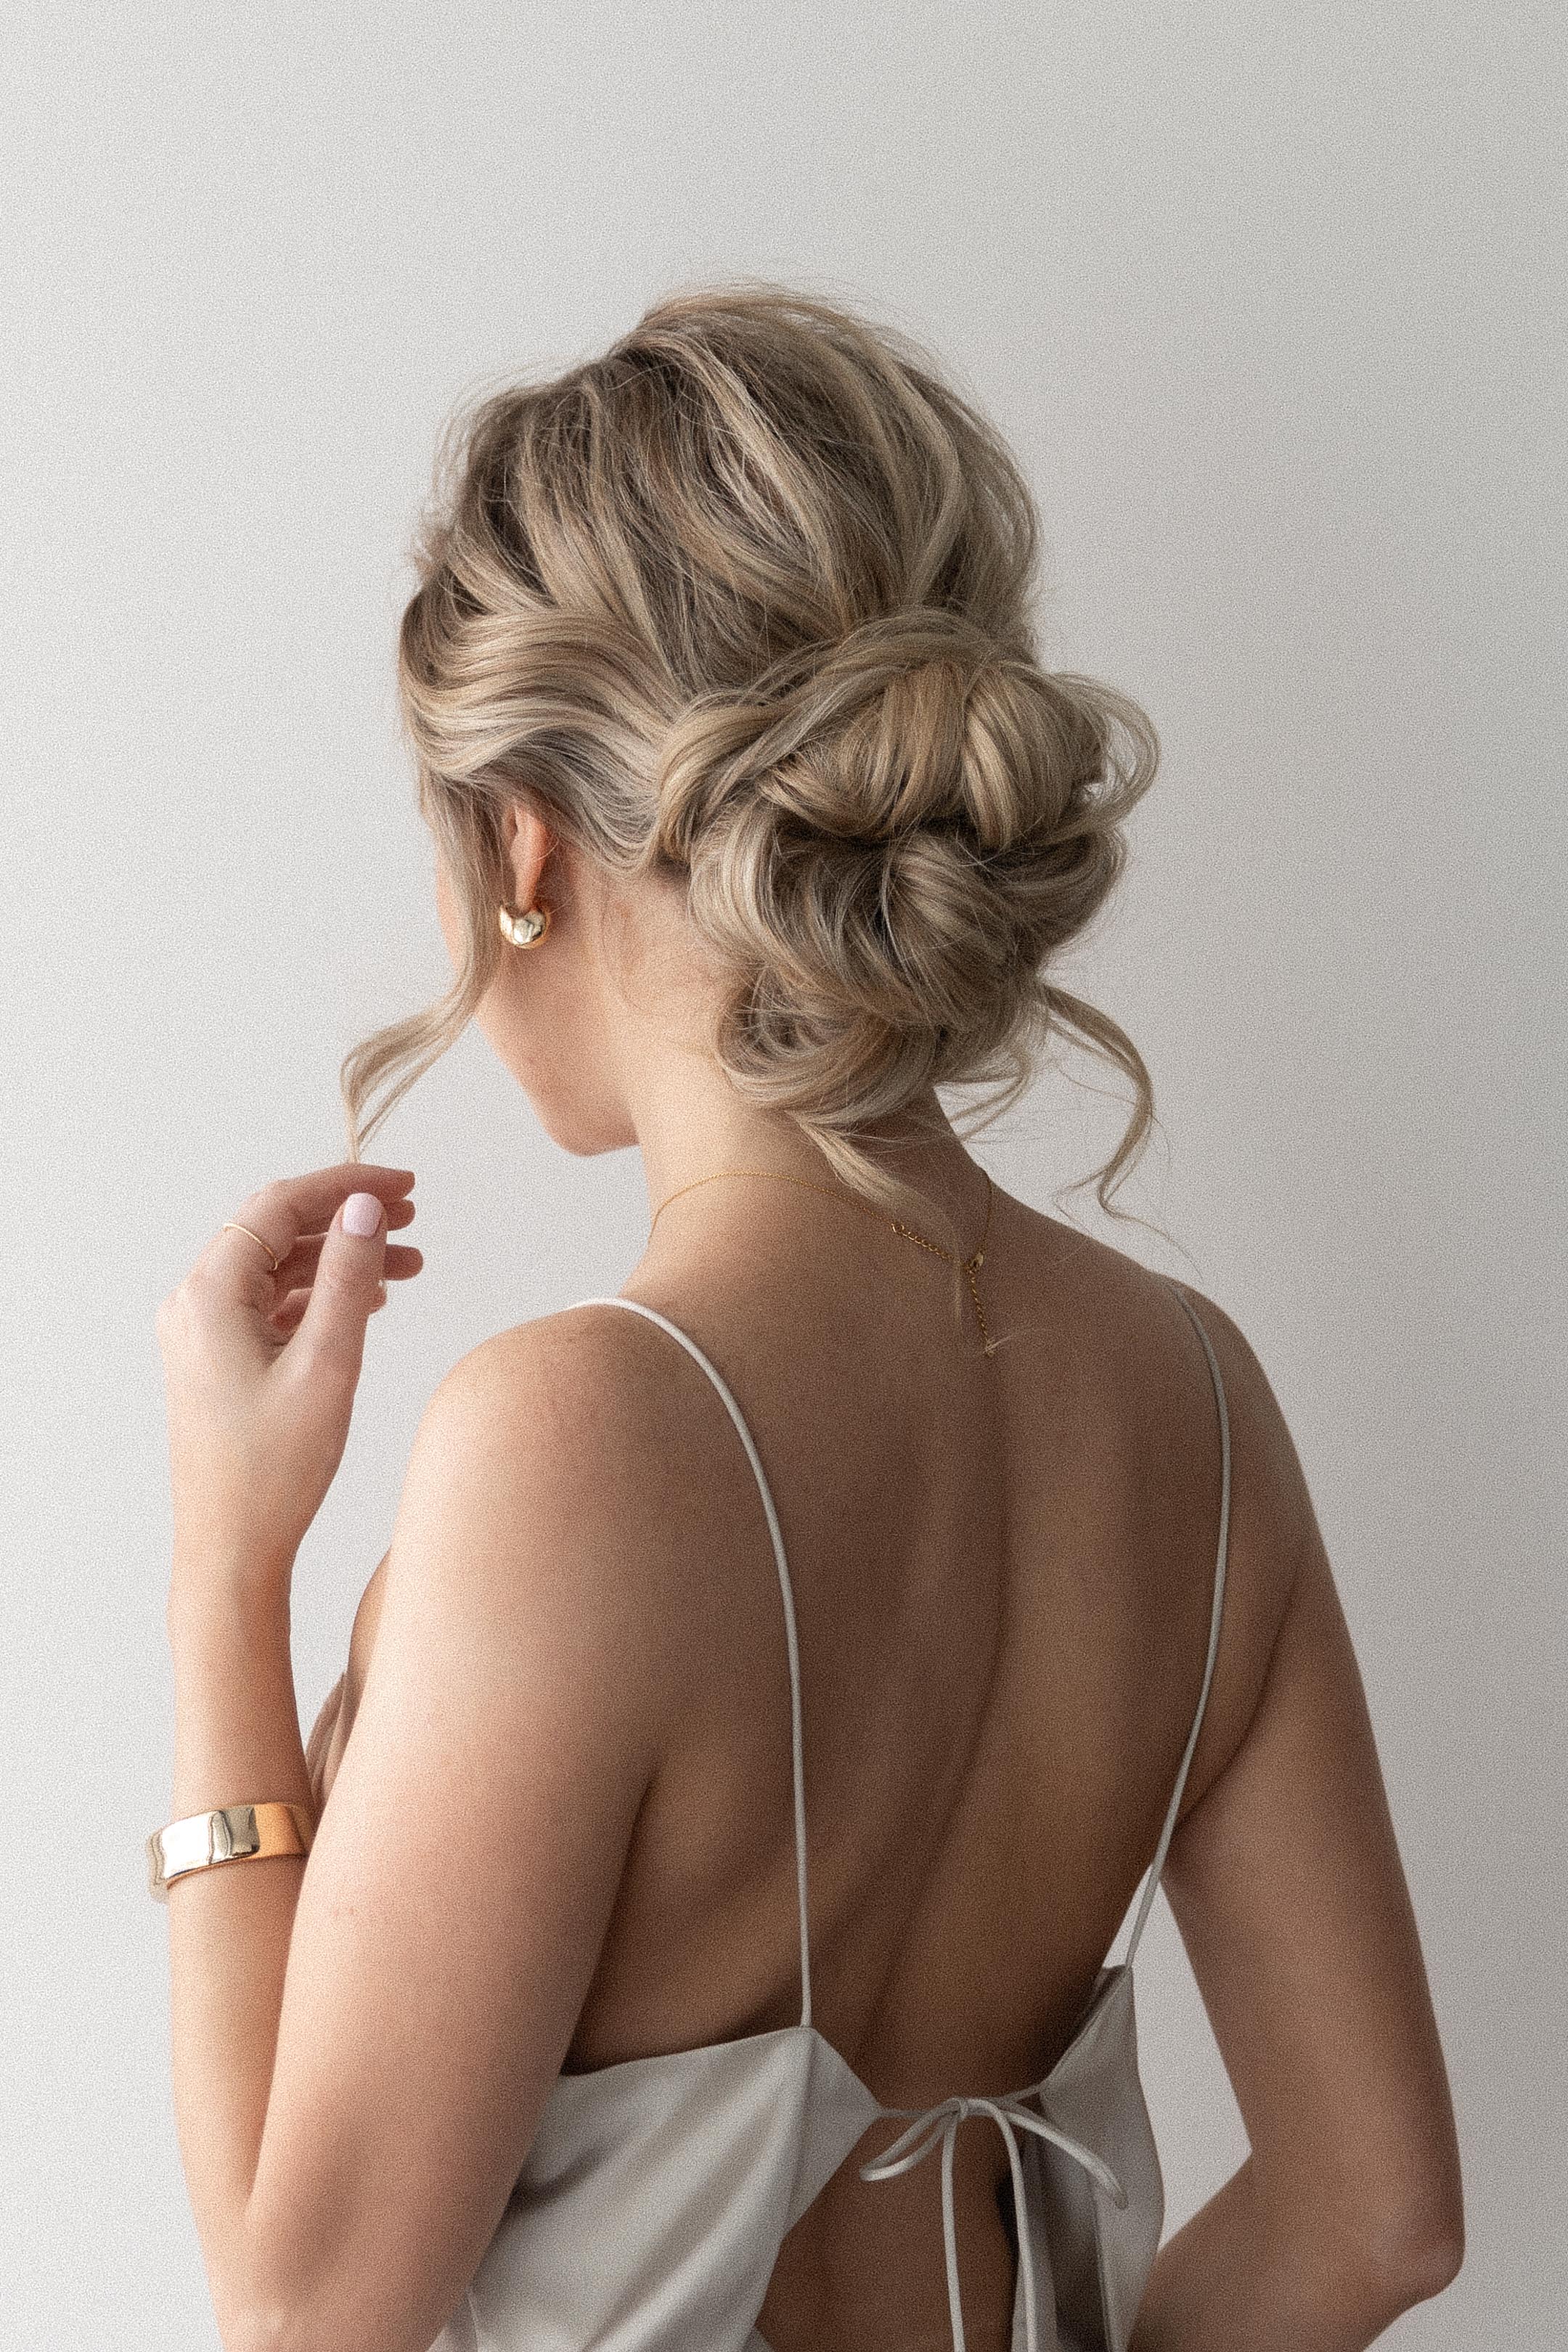 10 Braided Updo Hairstyles To Try For An Elegant Winter 2022 Look